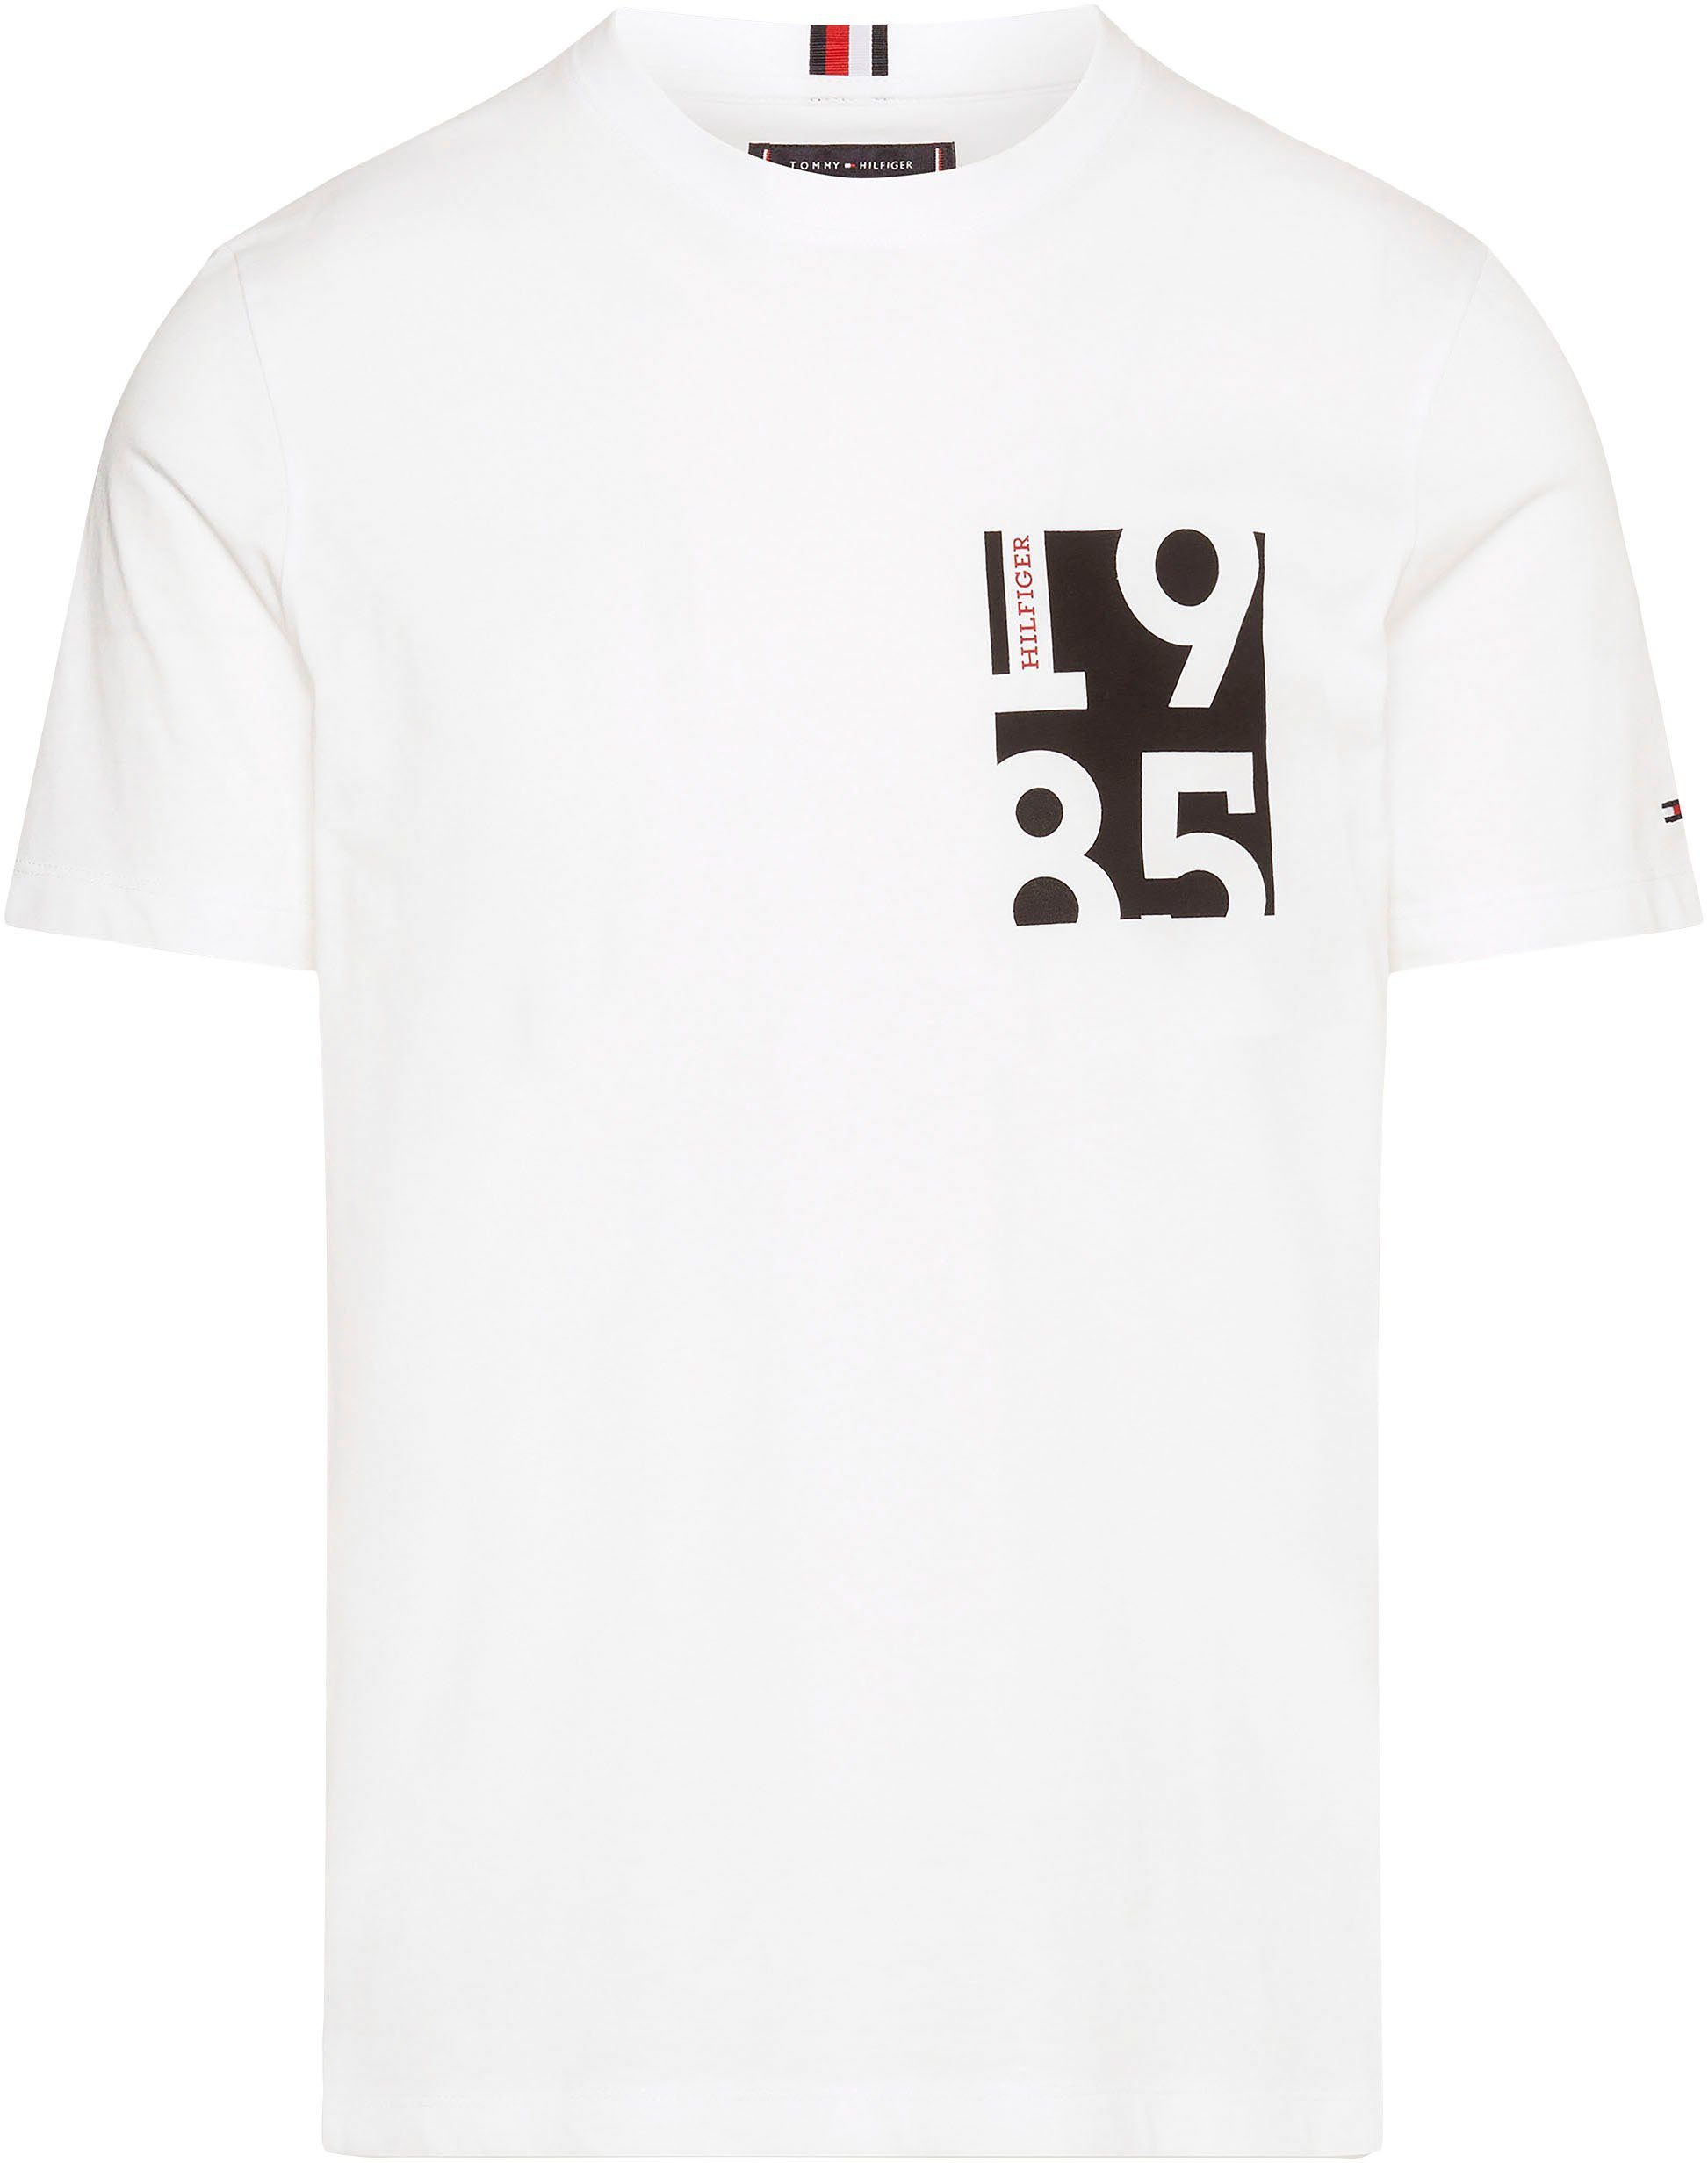 T-Shirt PRINT CHEST Tommy TEE Hilfiger white